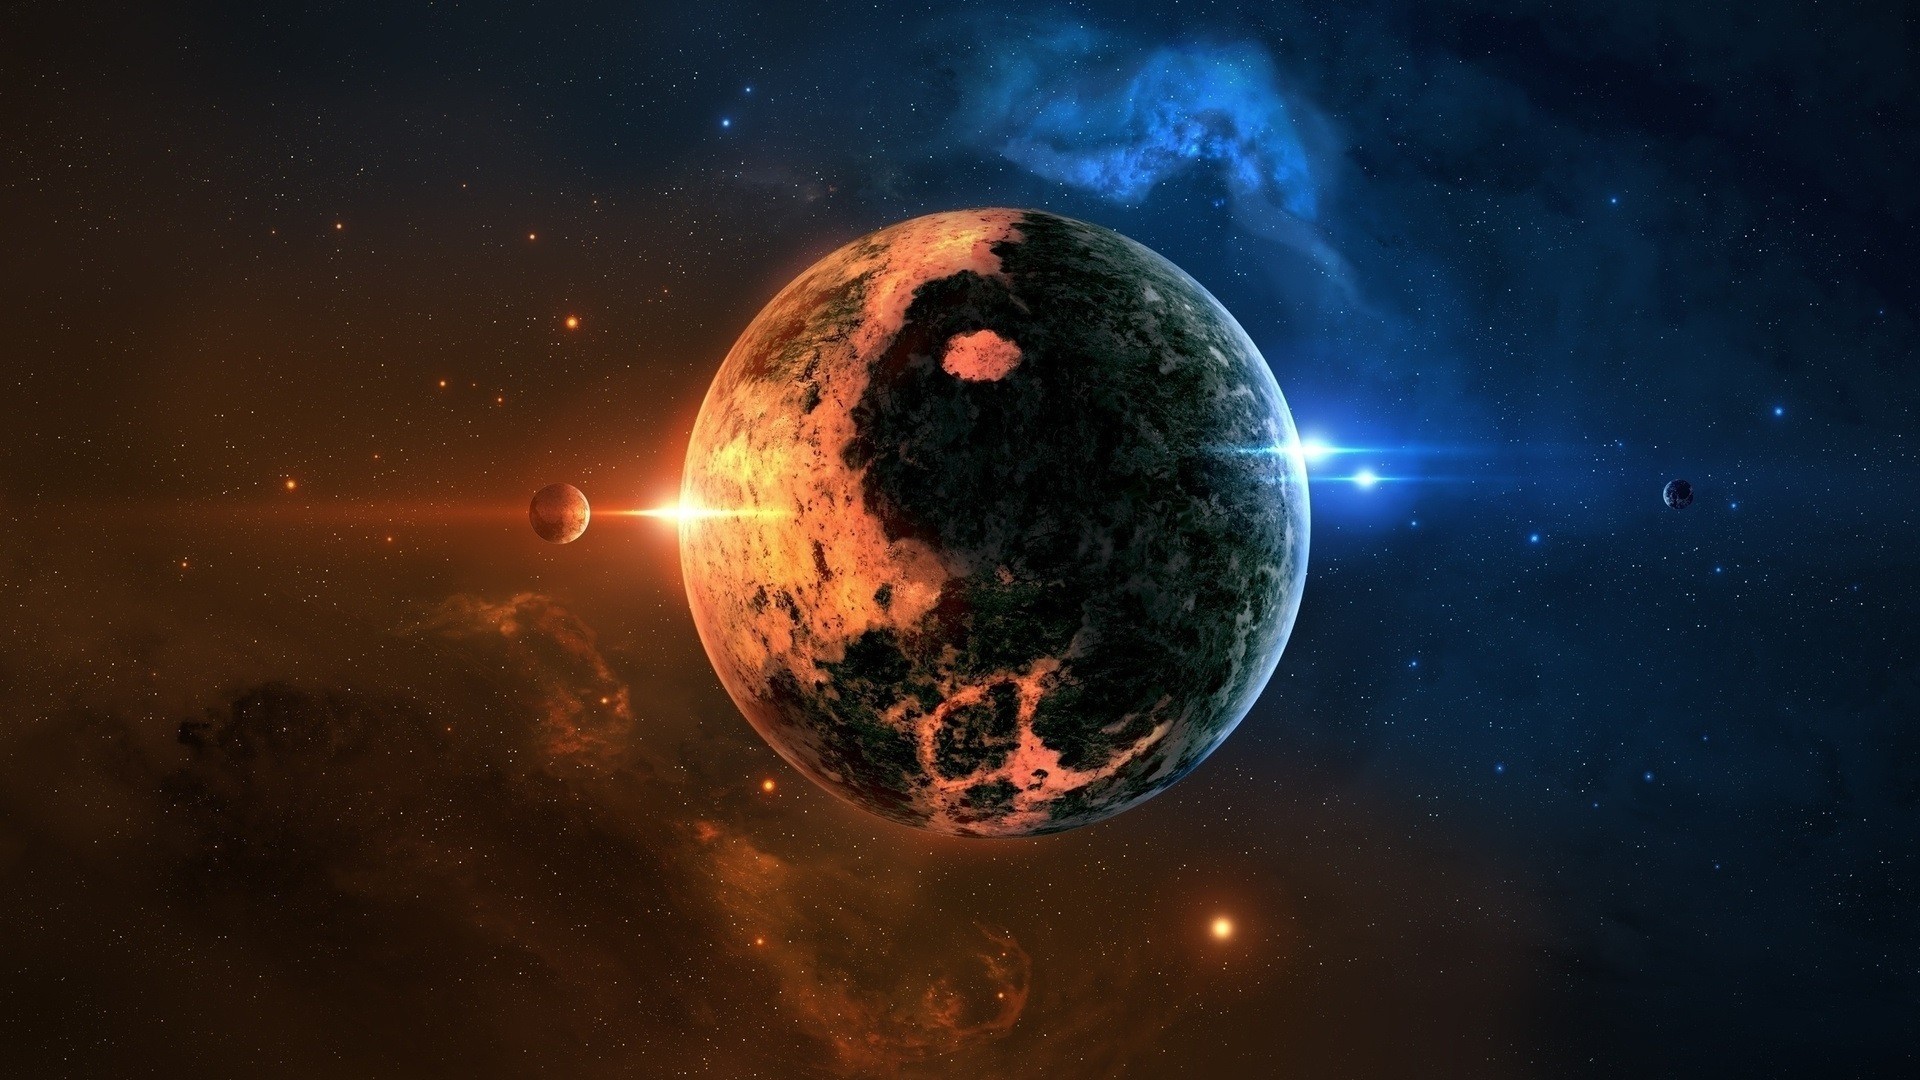 1920x1080 awesome space planet background Check more at http://www.finewallpapers.eu